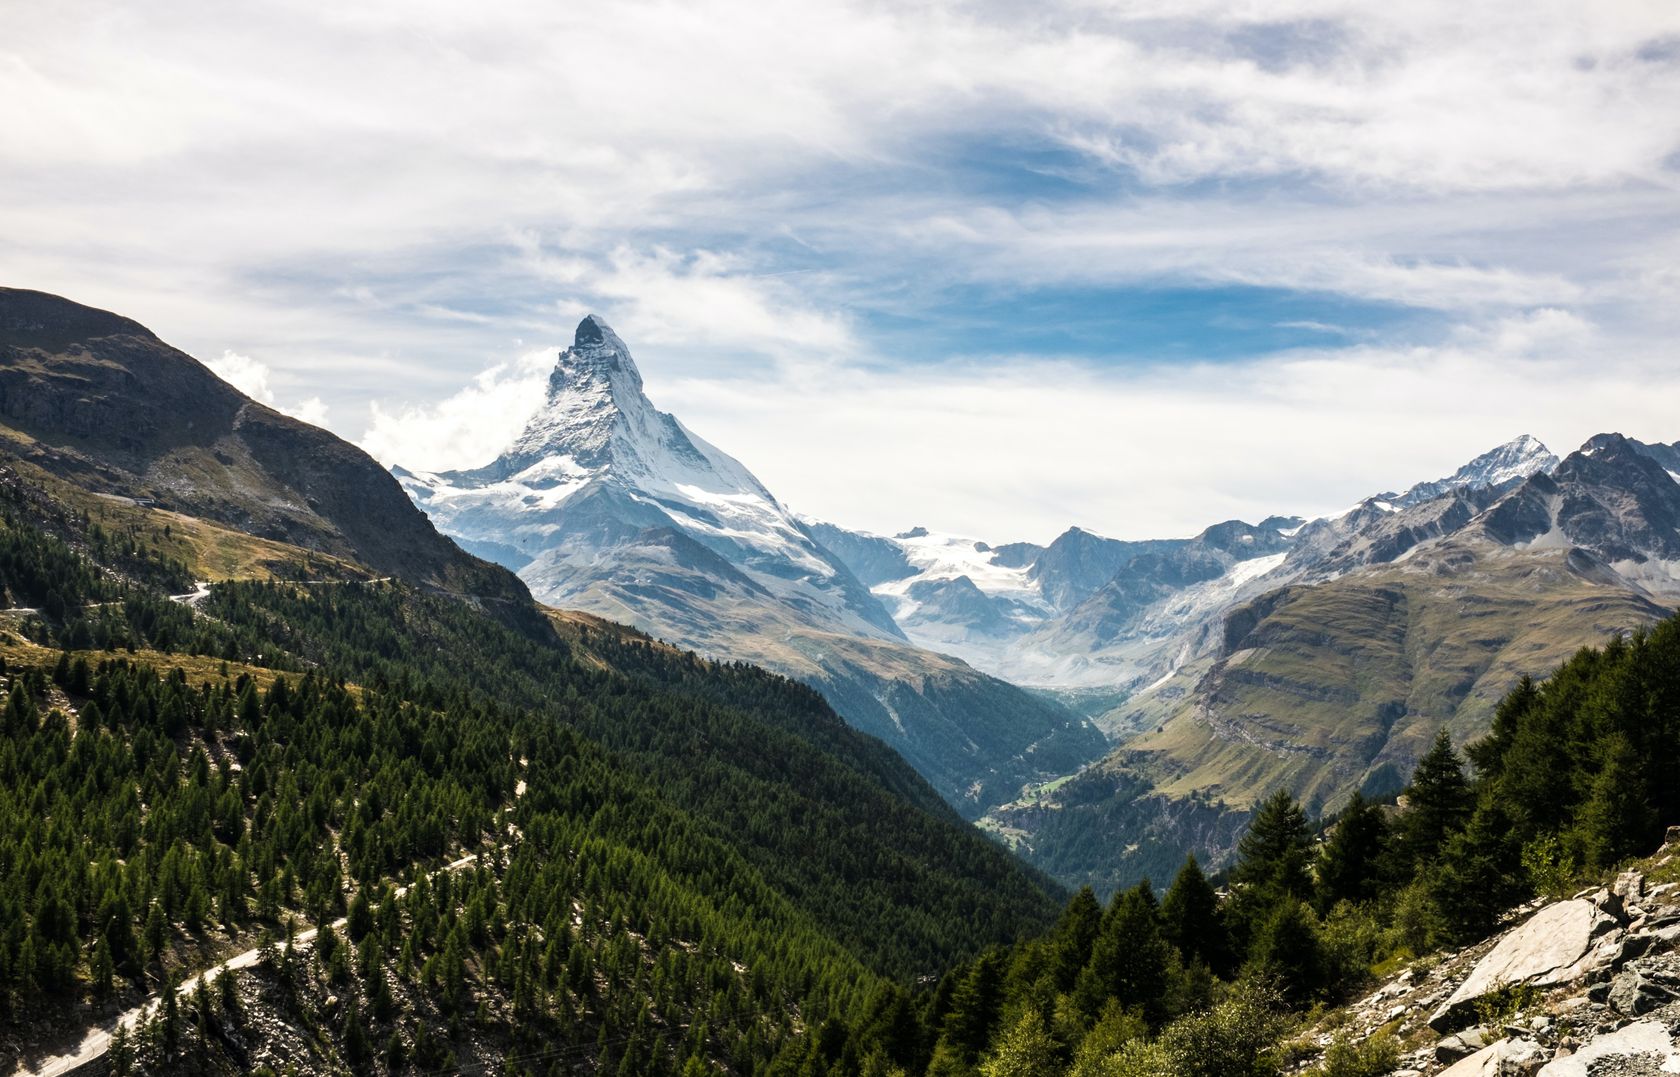 The Matterhorn in the distance, framed though a forested valley against a blue sky